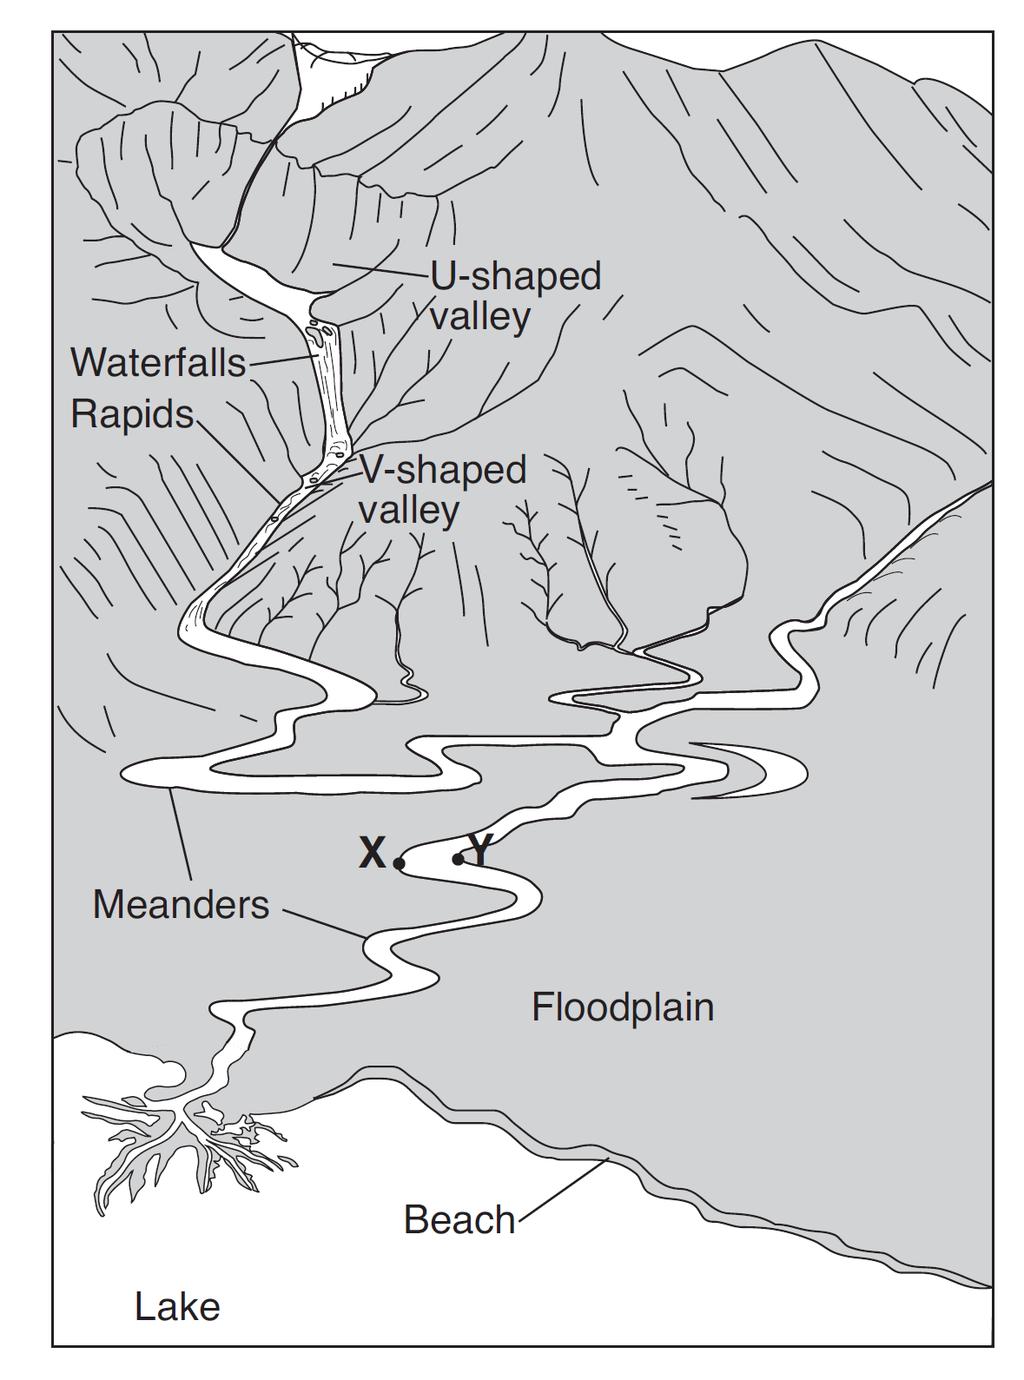 Base your answers to questions 31 through 33 on the diagram below, which shows several different landscape features. Points X and Y indicate locations on the streambank. 35.